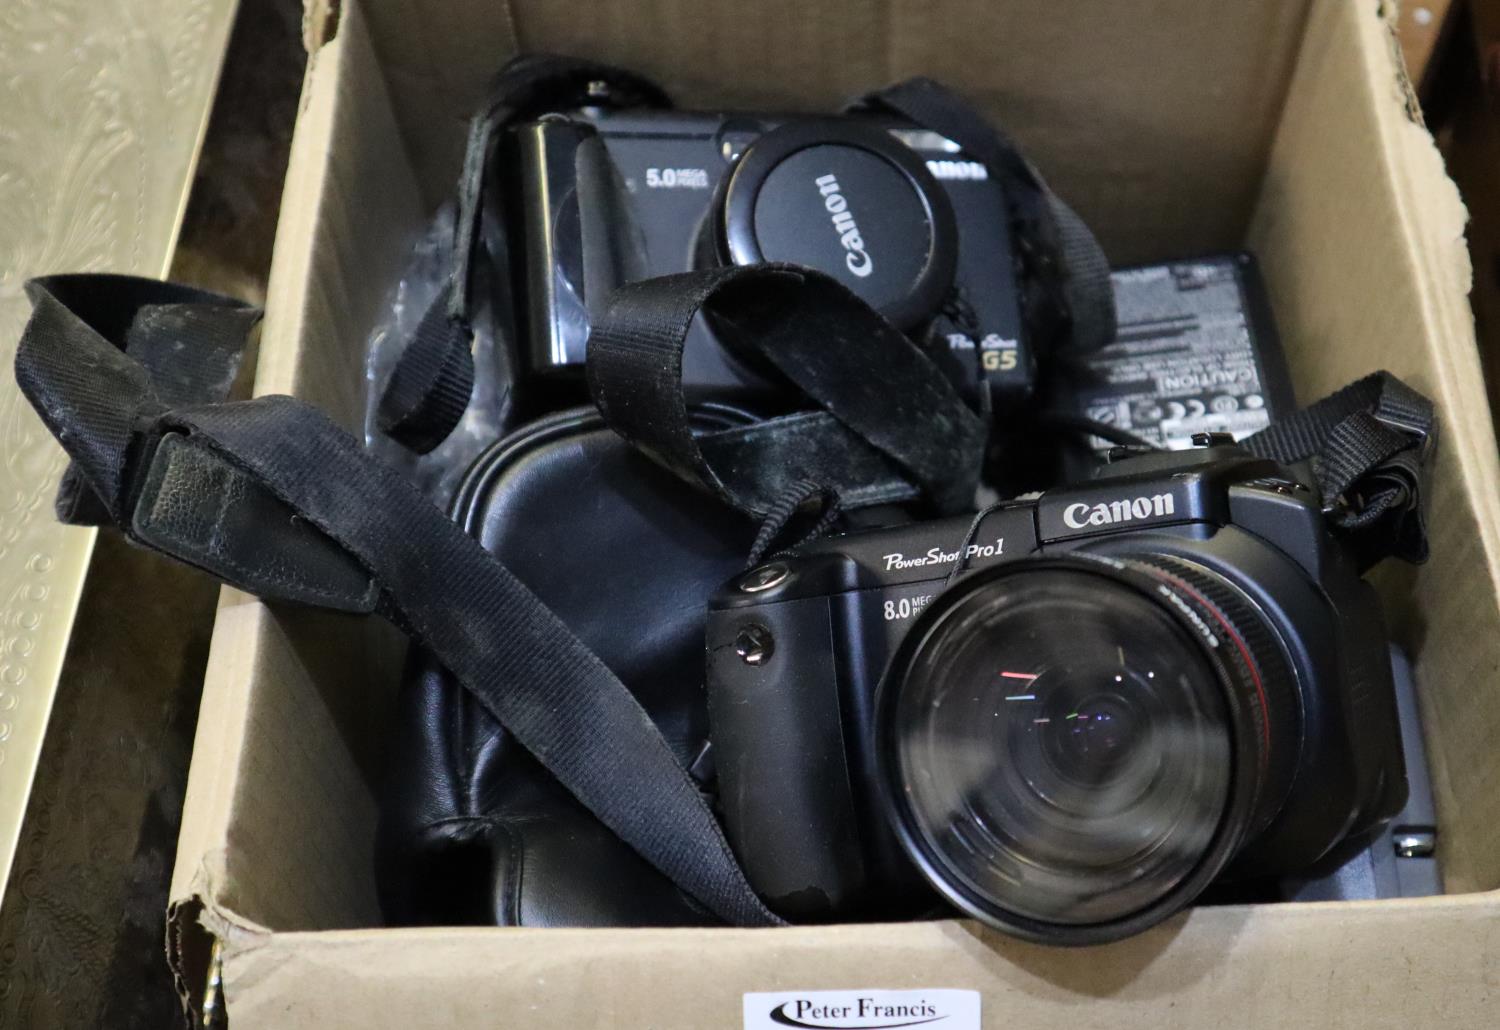 Box of cameras and accessories to include Canon Powershot G5, Canon Powershot pro1, cables, etc. (